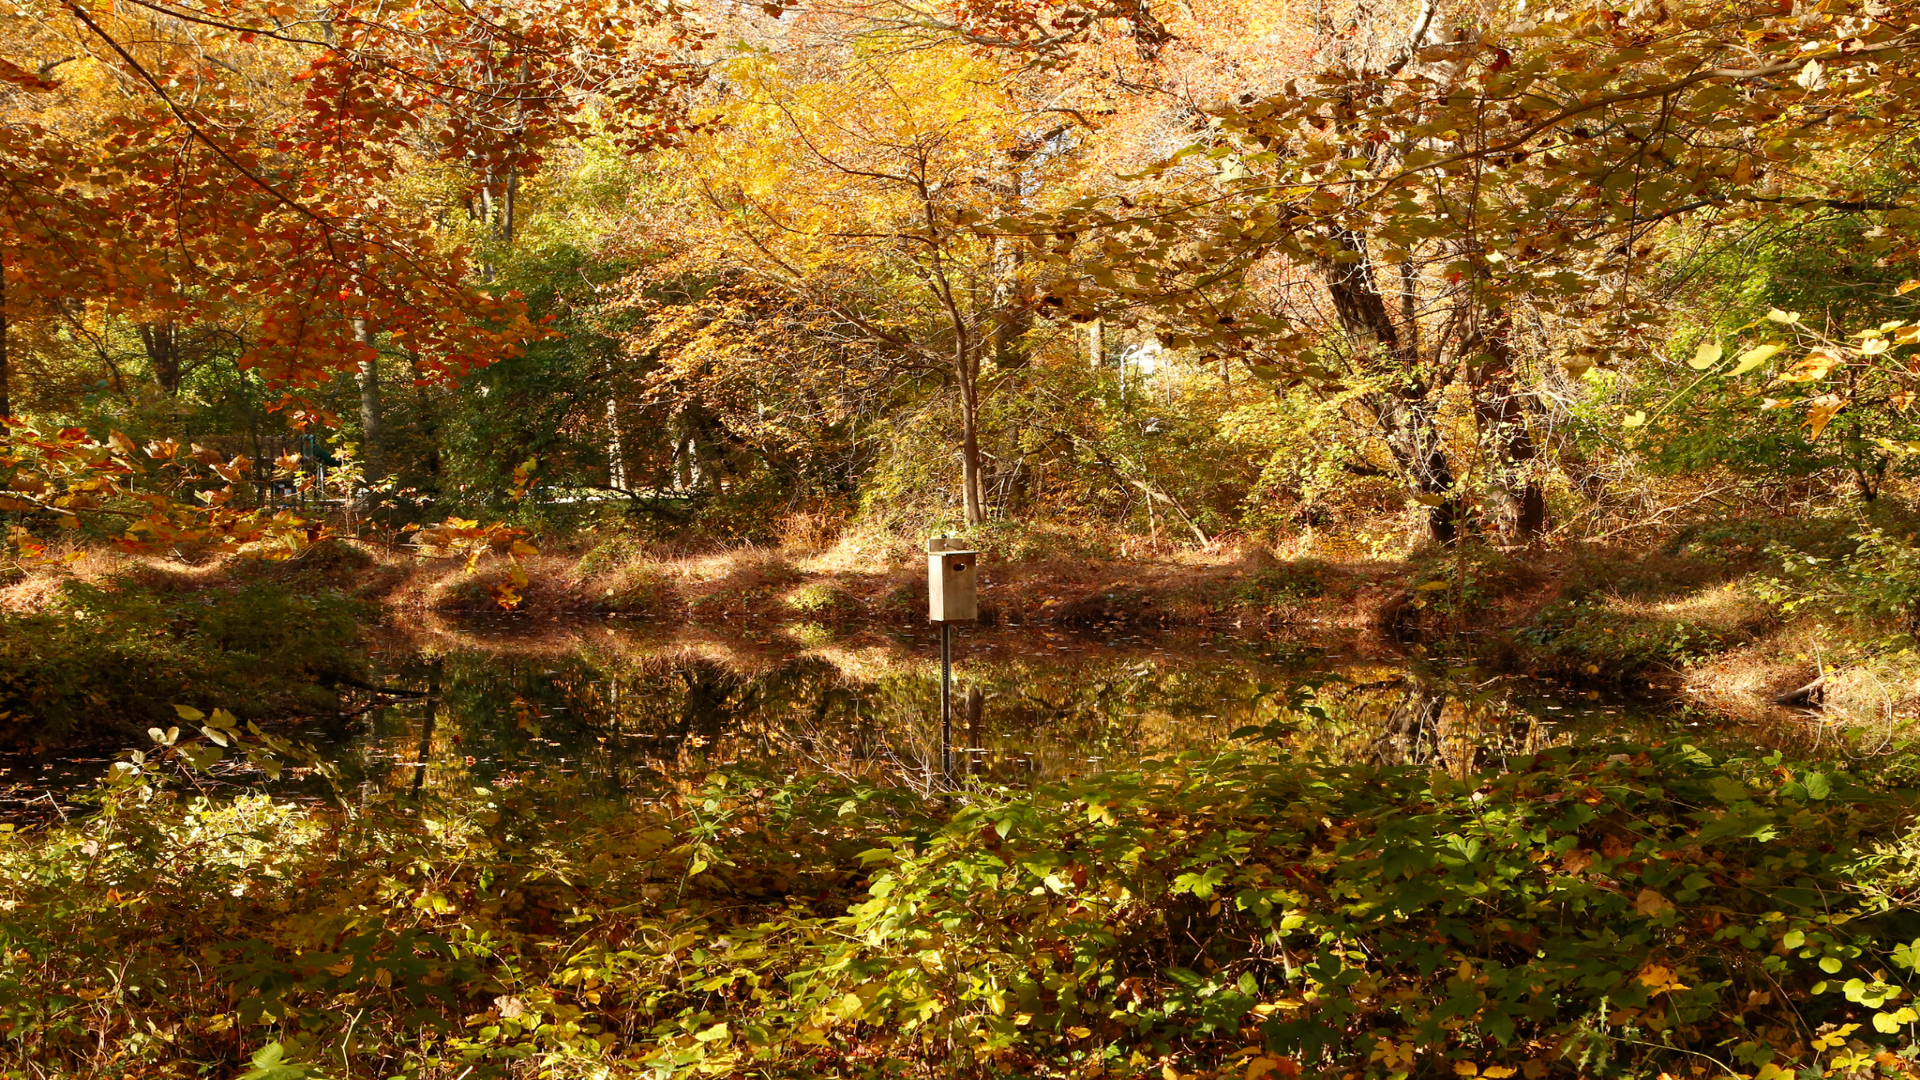 A vernal pool reflects the bright autumn colors of the maple and oak trees.